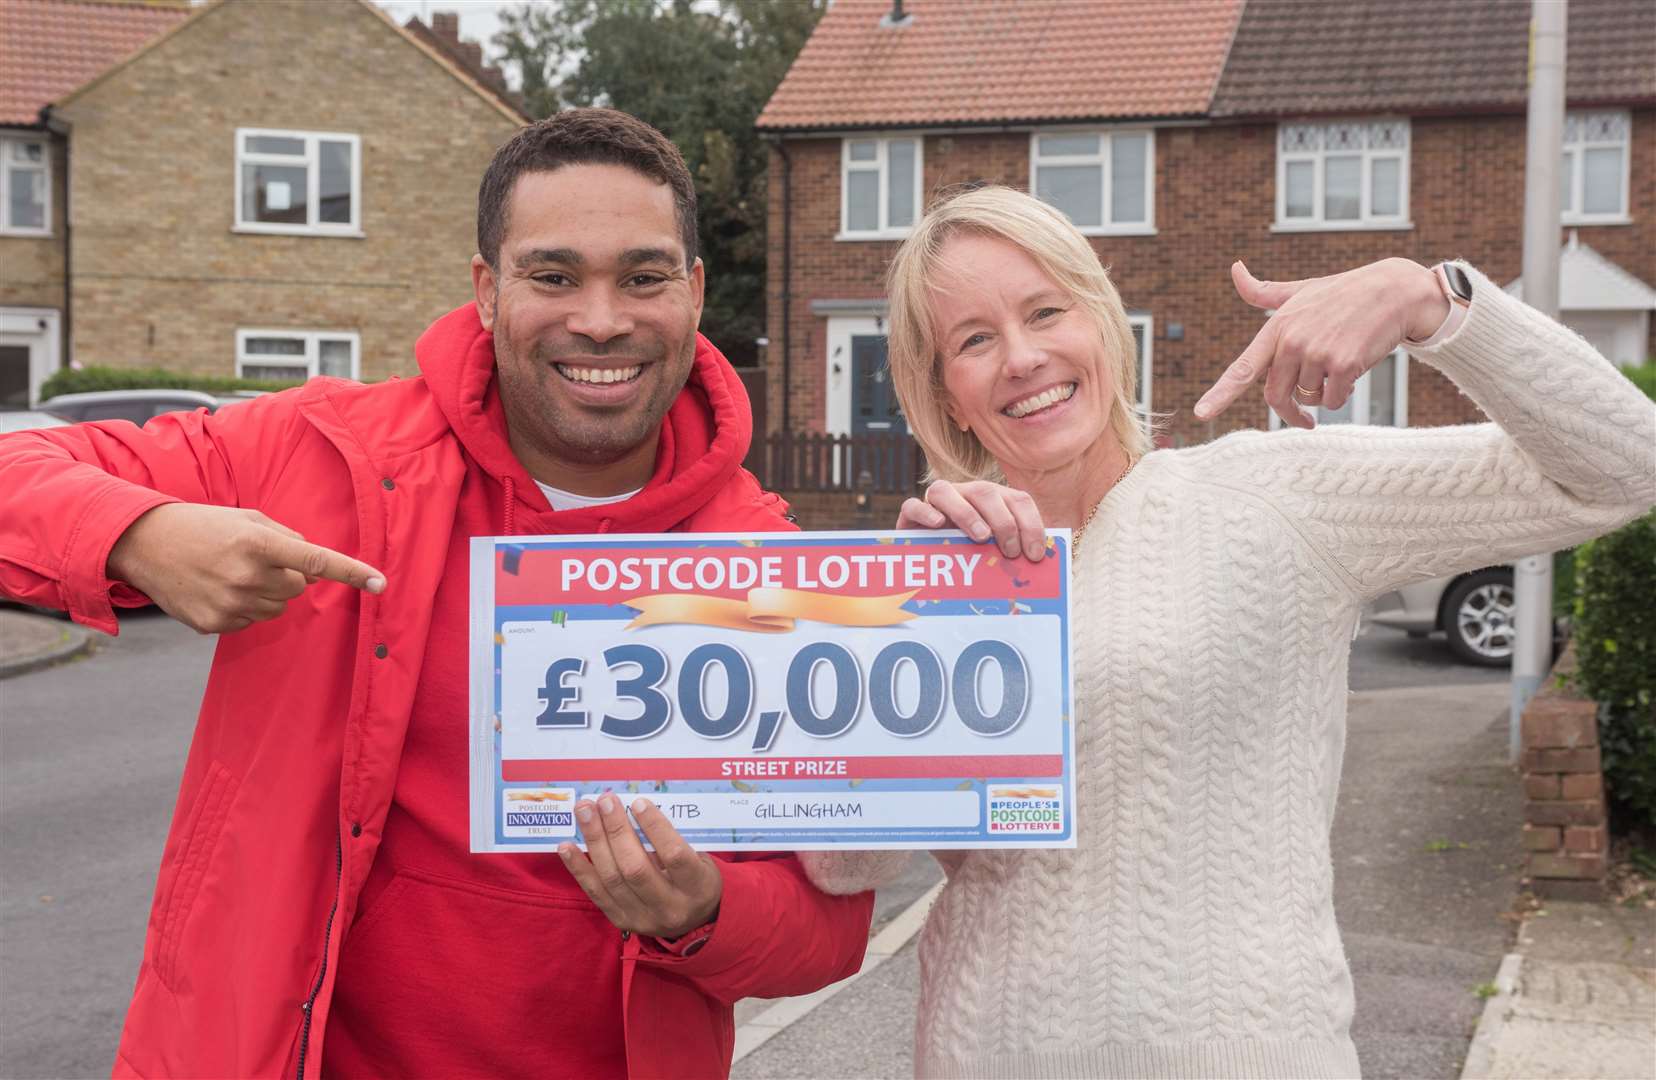 Danyl Johnson with Justine White who plans to buy a new kettle with her winnings